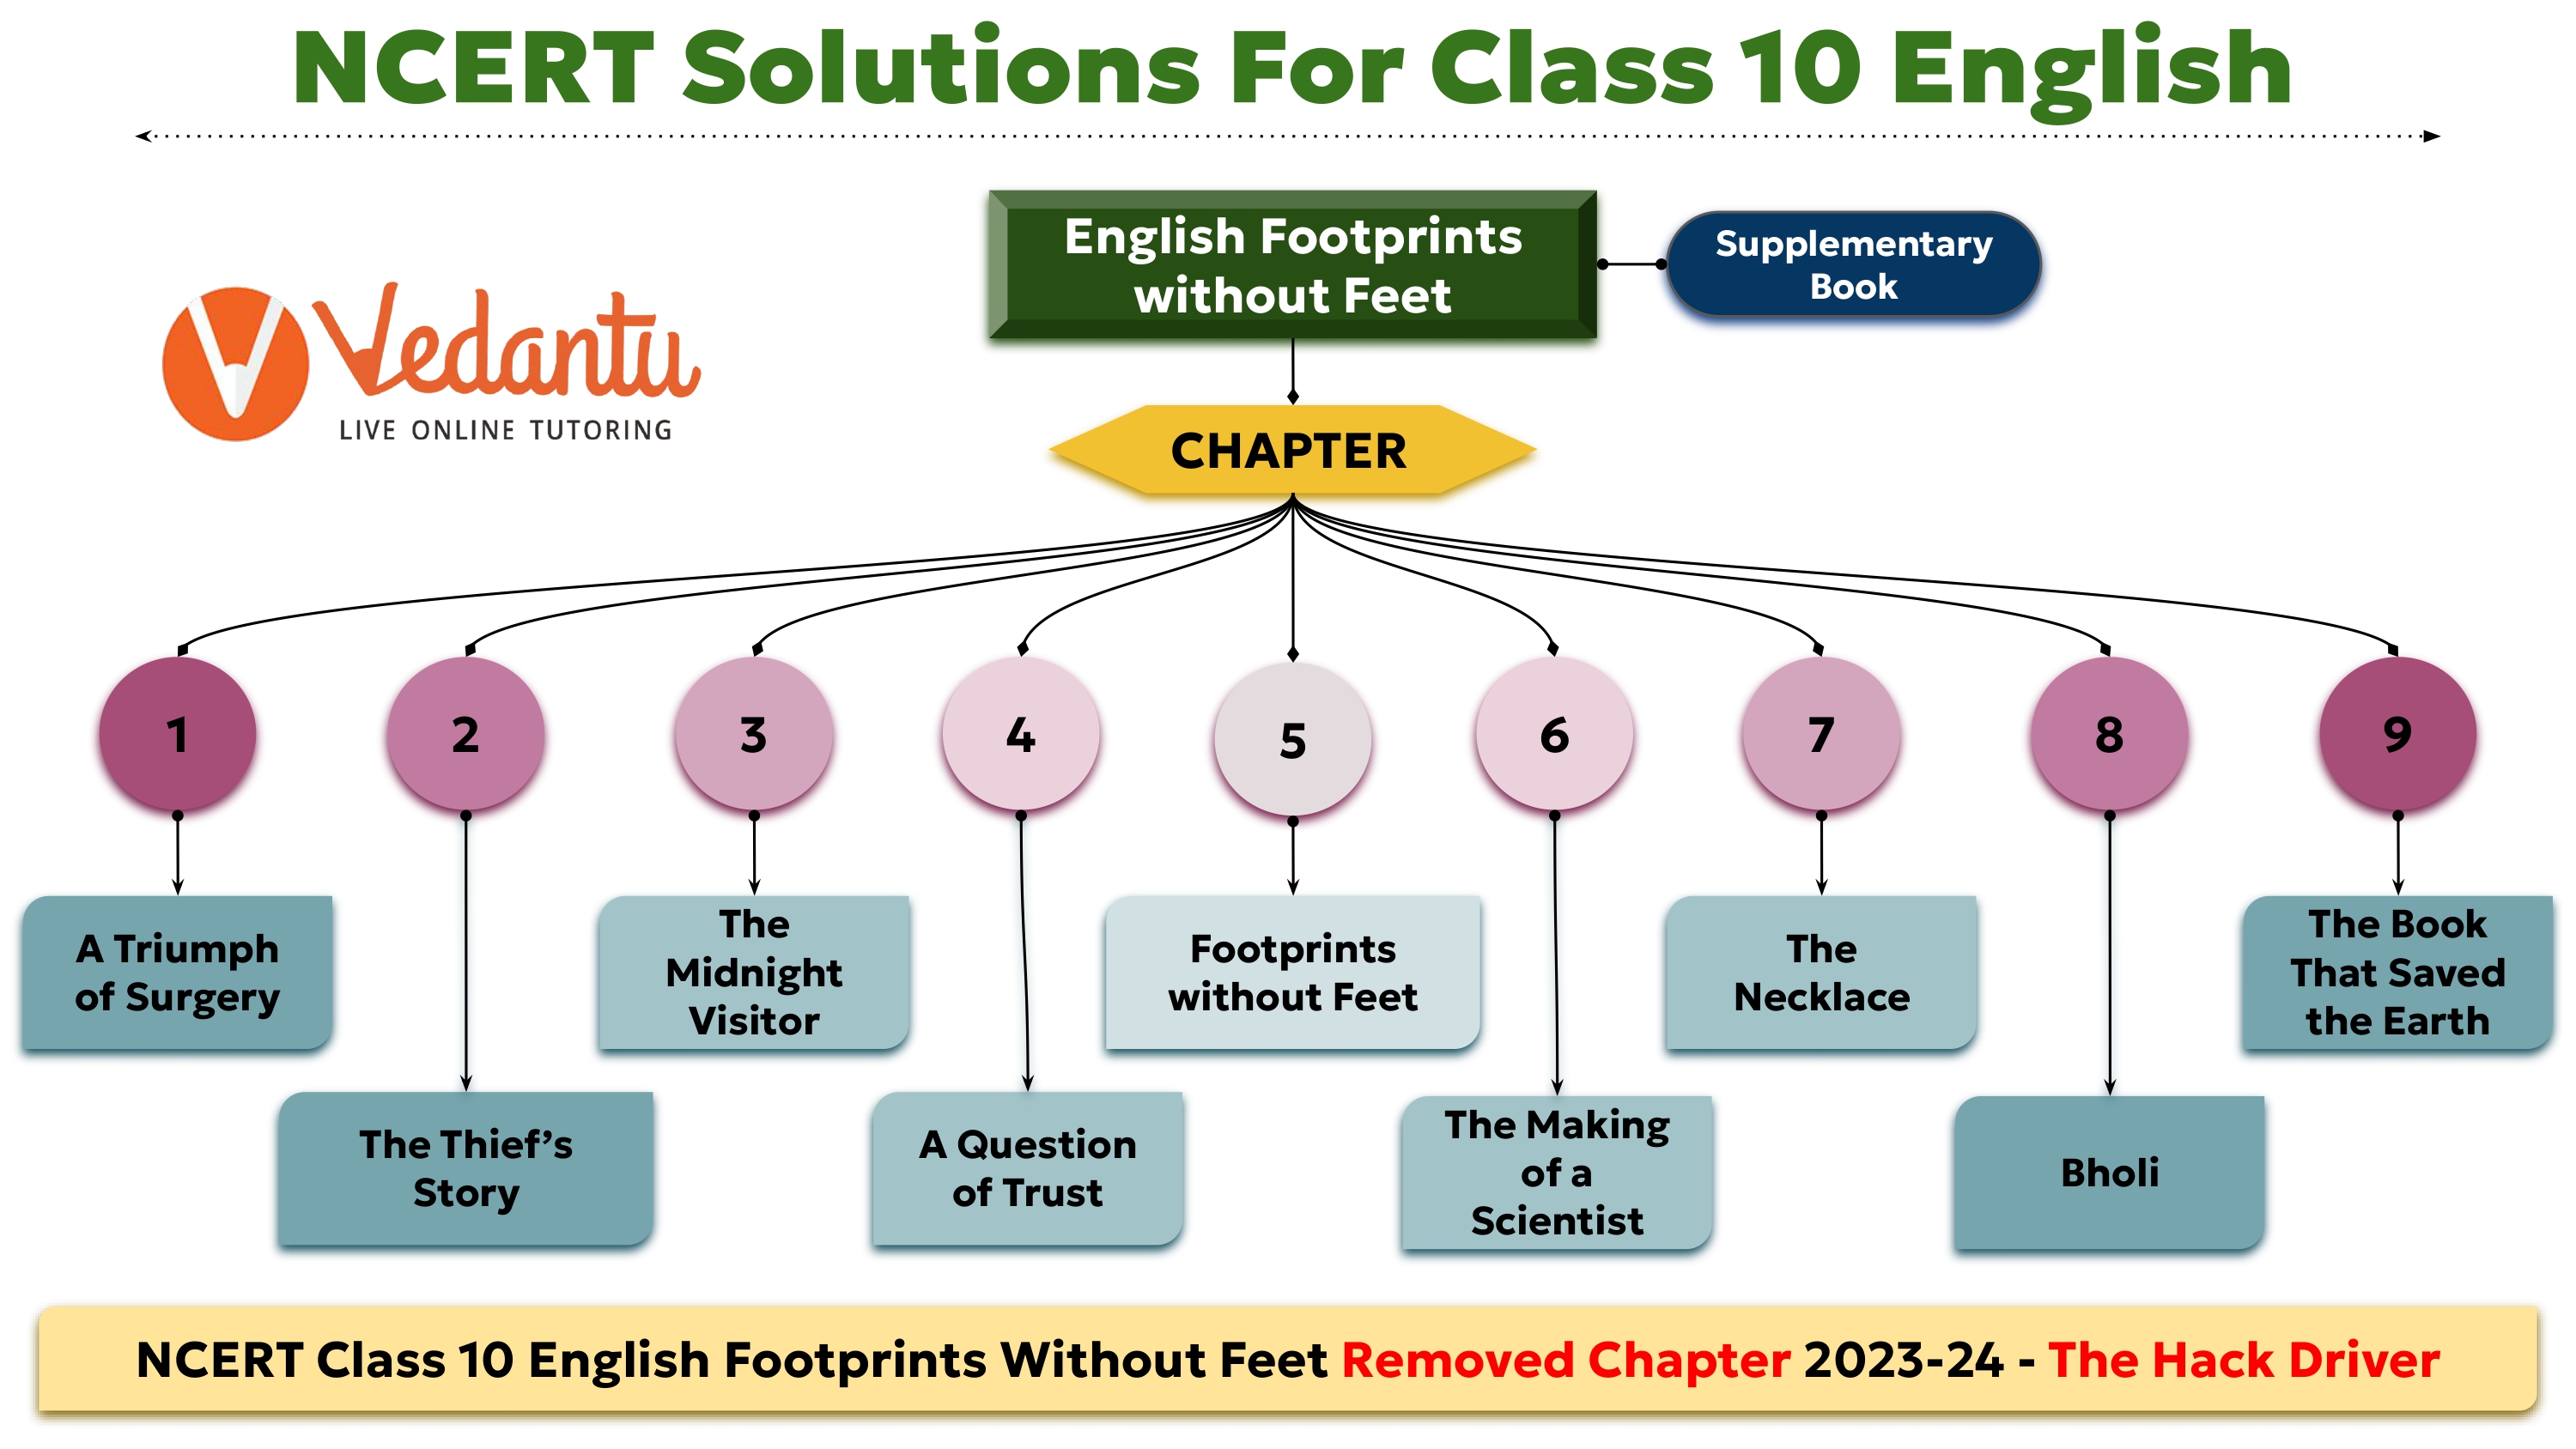 NCERT Solutions for Class 10 English - Footprints without Feet (Supplementary Book) with chapter-wise solutions for all chapters image